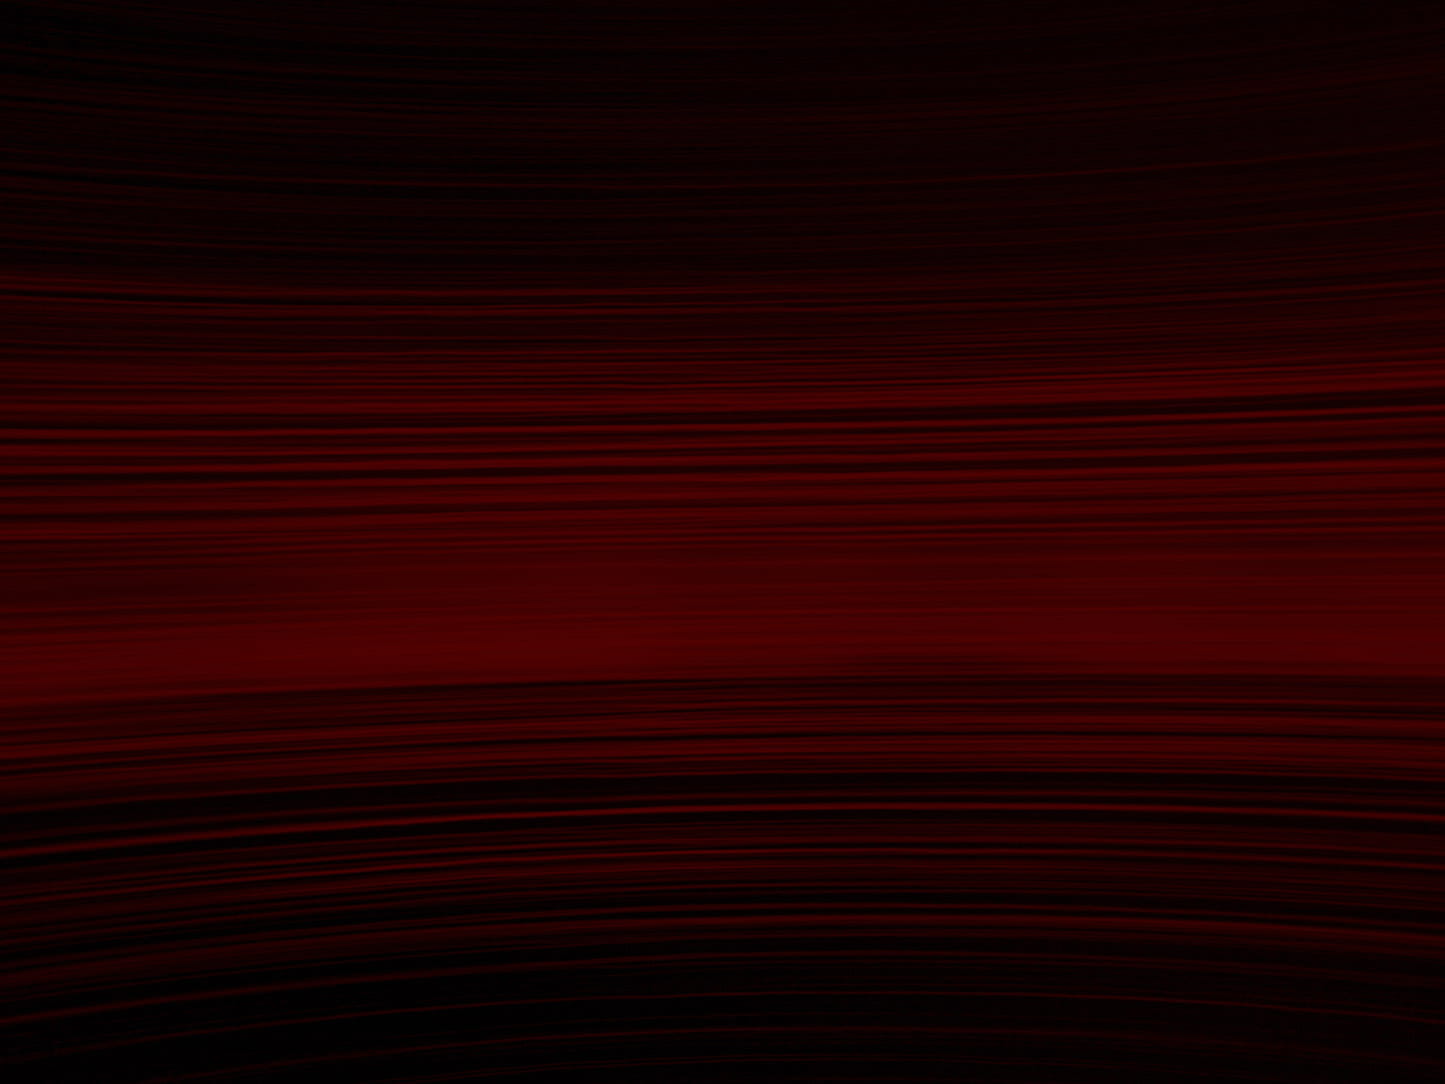 Red and black gradient background